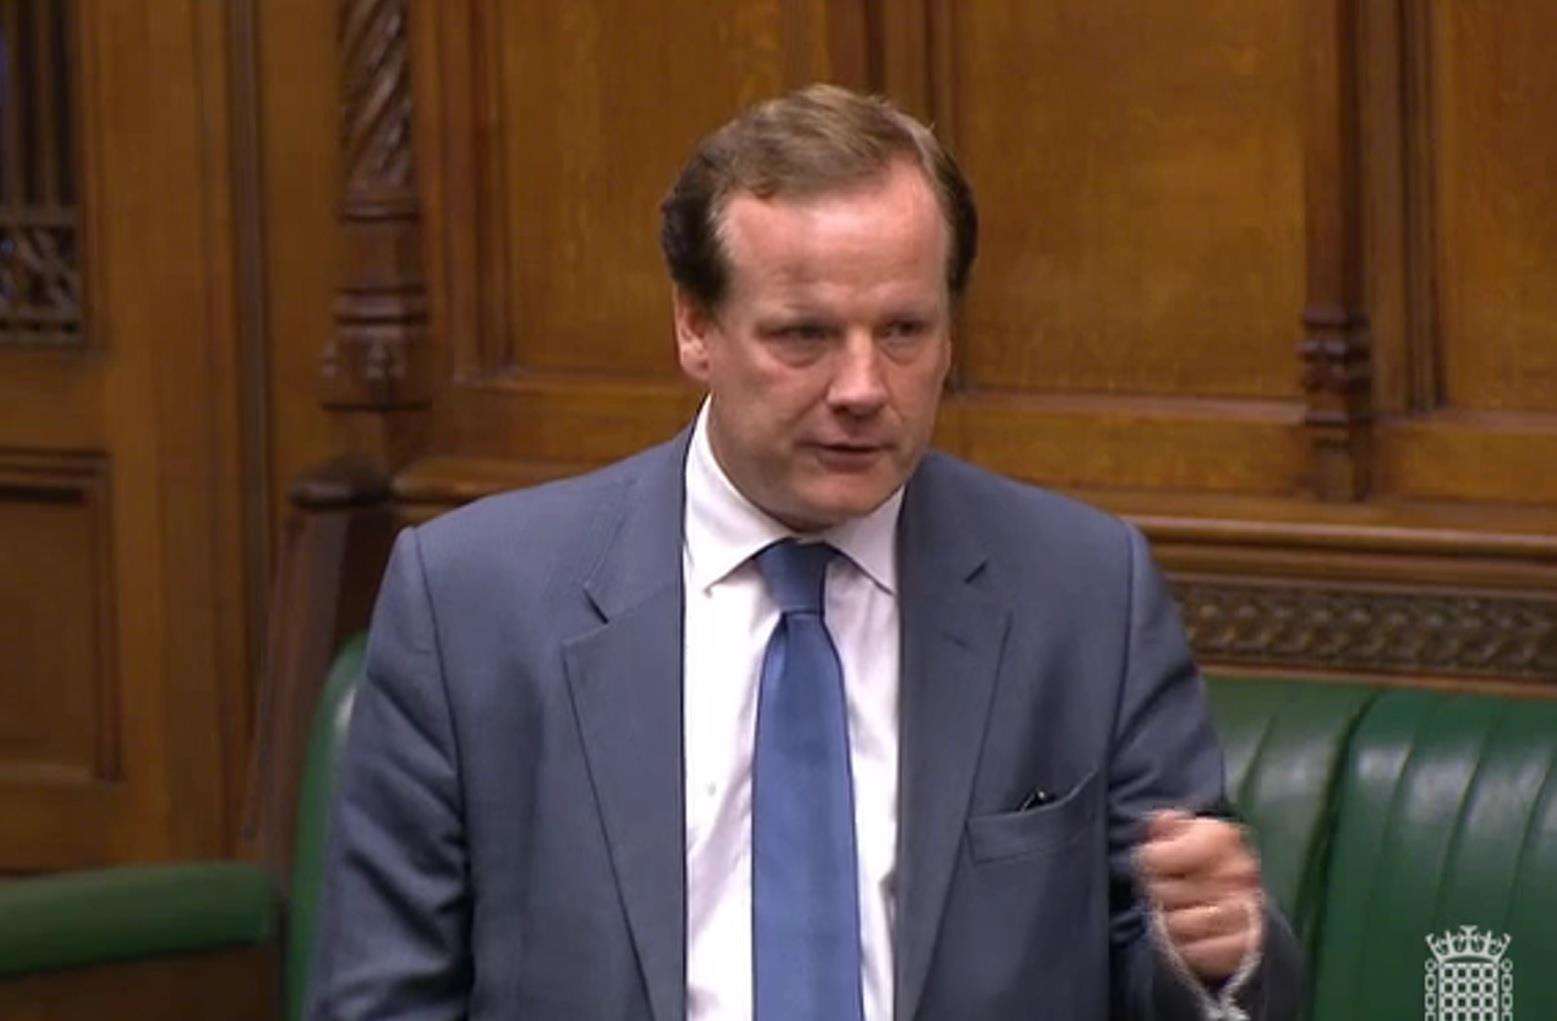 Charlie Elphicke: "No encouragement on how to vote."